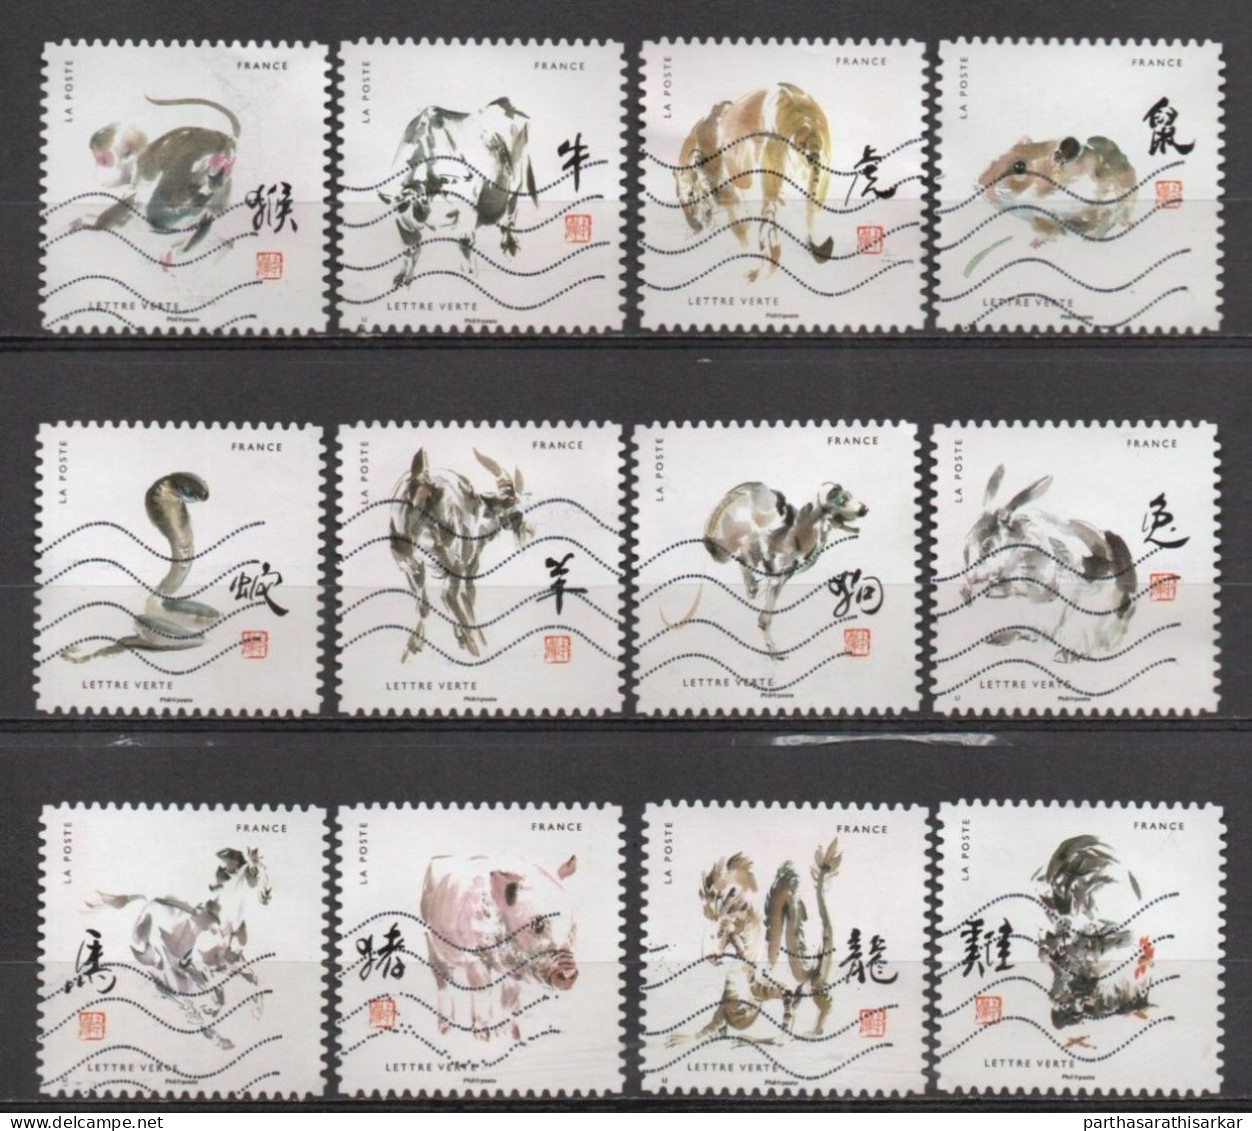 FRANCE 2017 CHINESE ZODIAC SIGNS COMPLETE SET USED RARE - Used Stamps